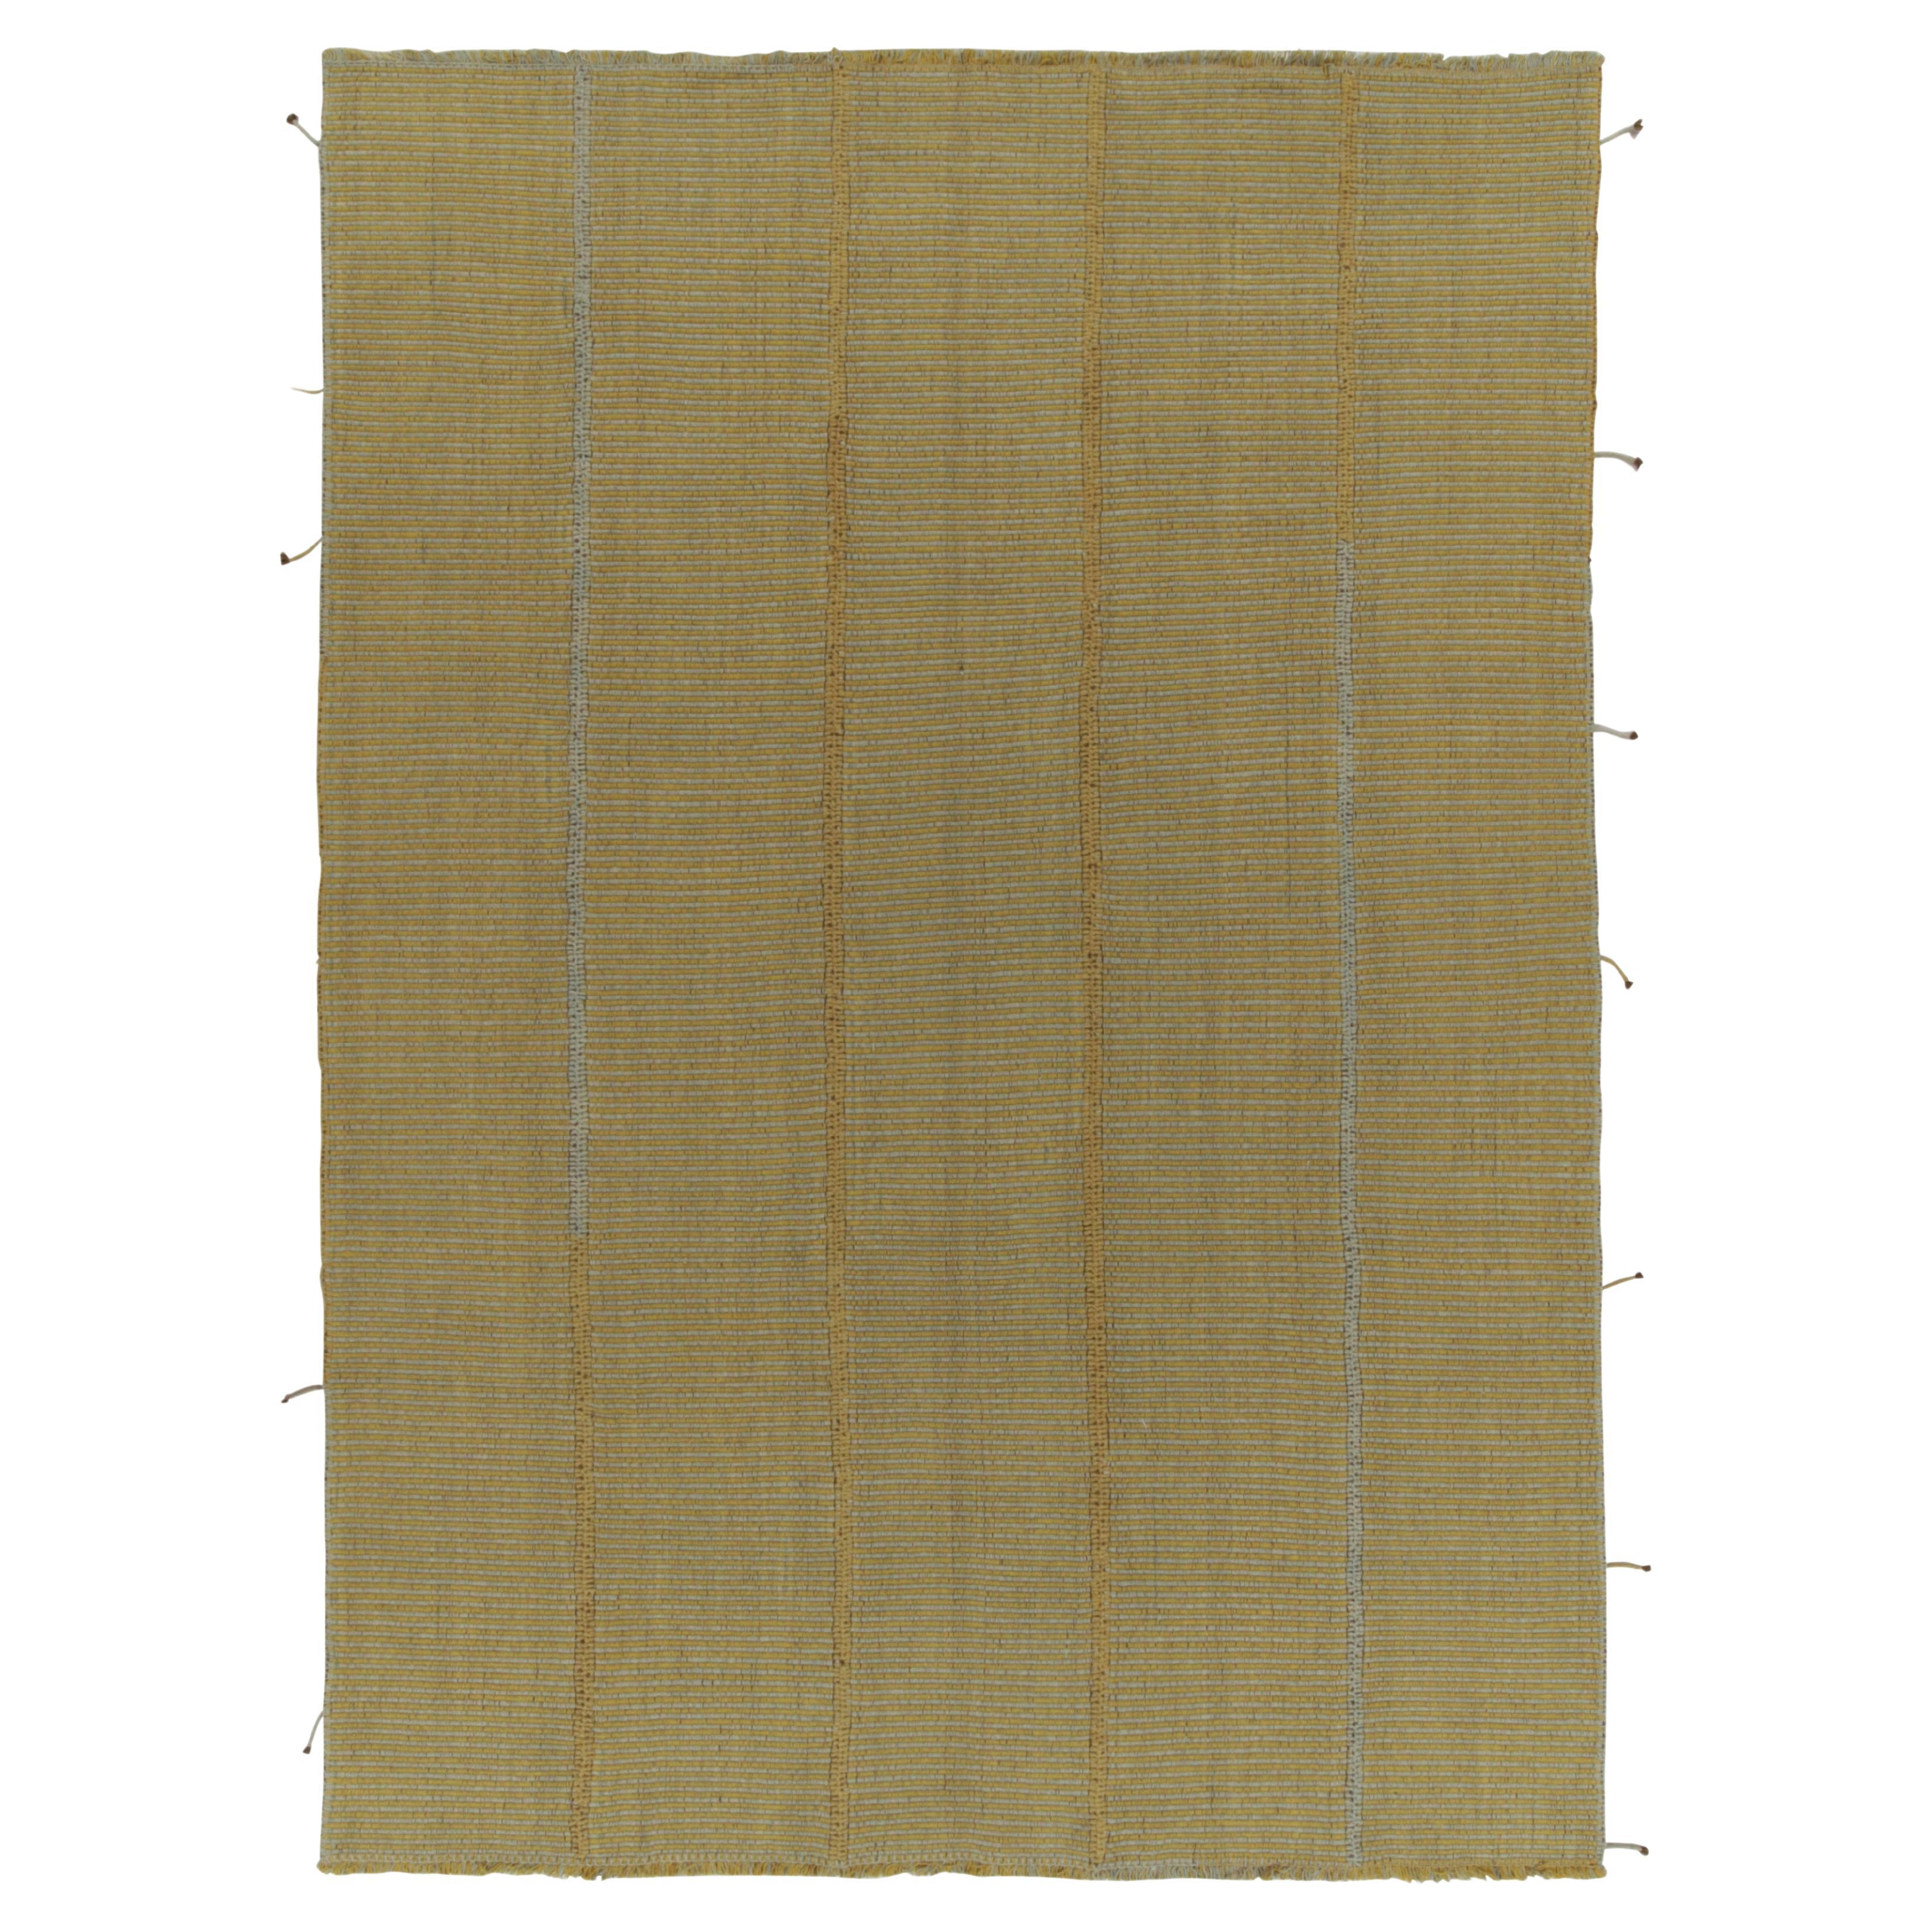 Rug & Kilim’s Contemporary Kilim in Golden-Yellow with Blue Stripes & Accents For Sale